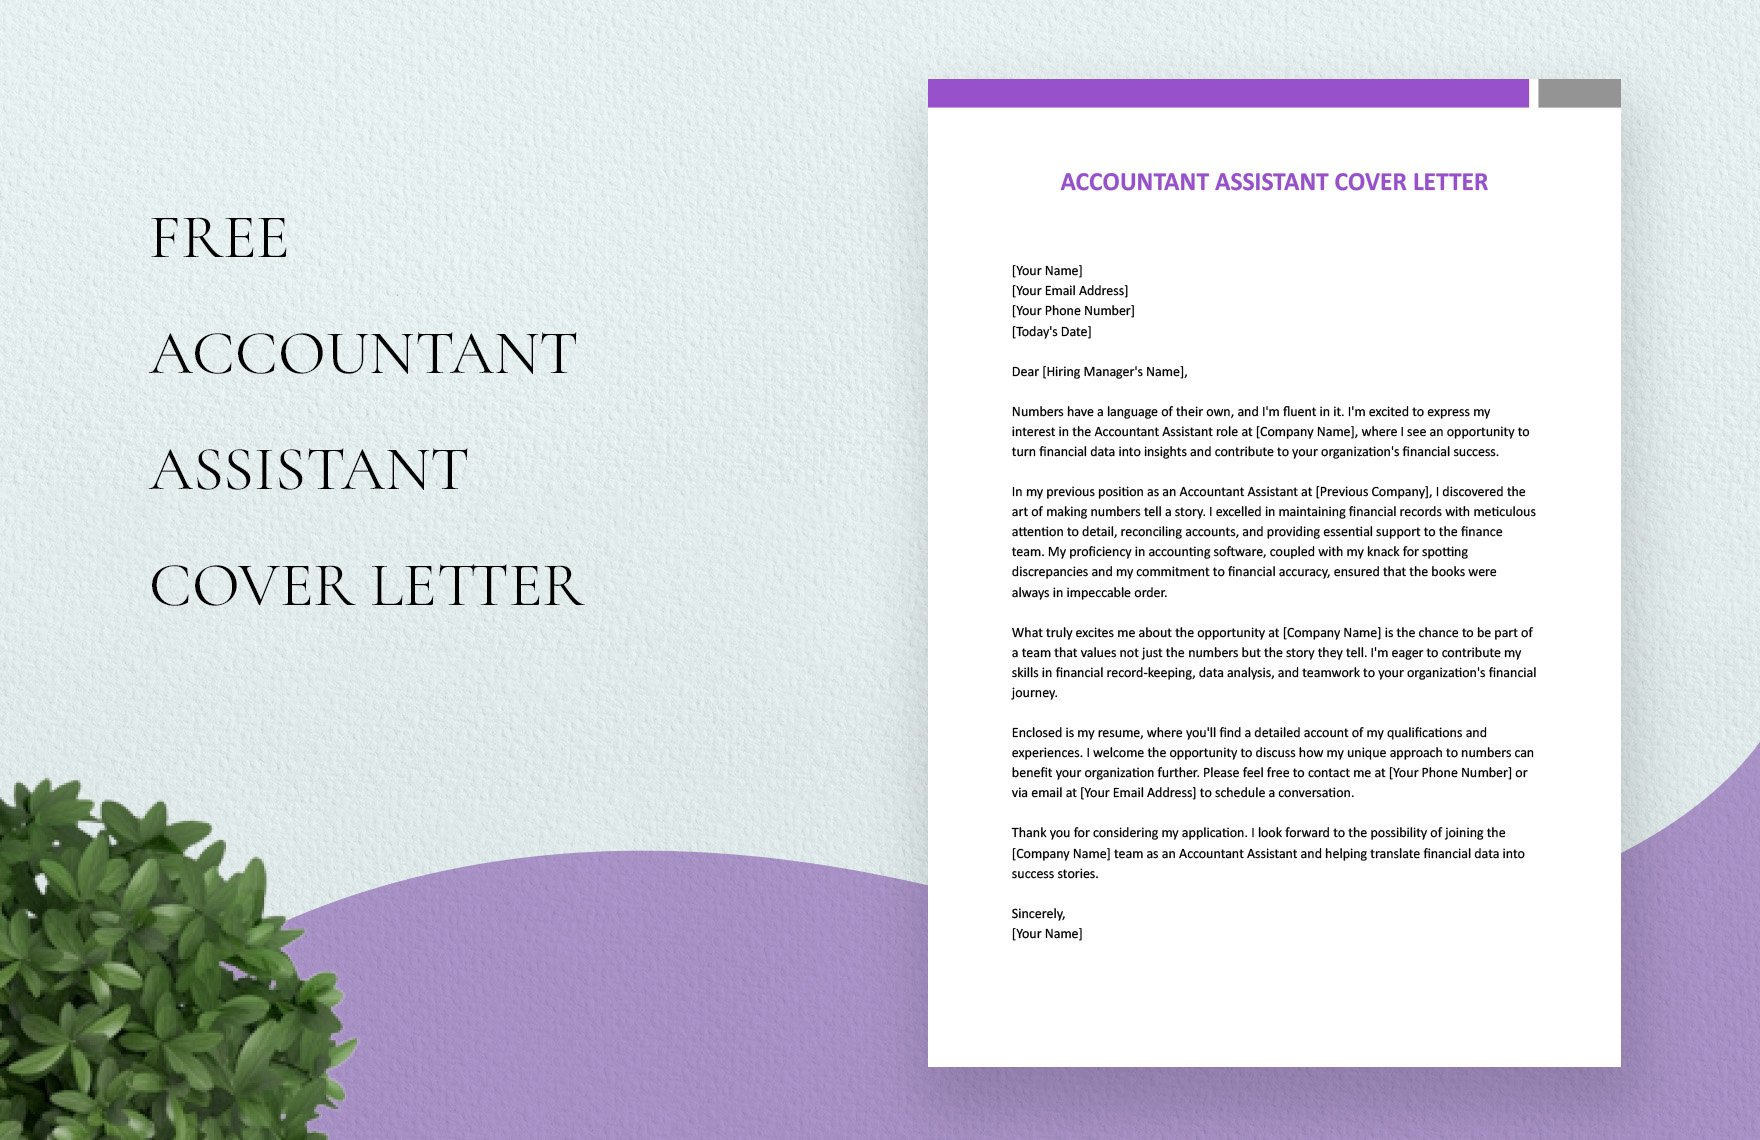 Accountant Assistant Cover Letter